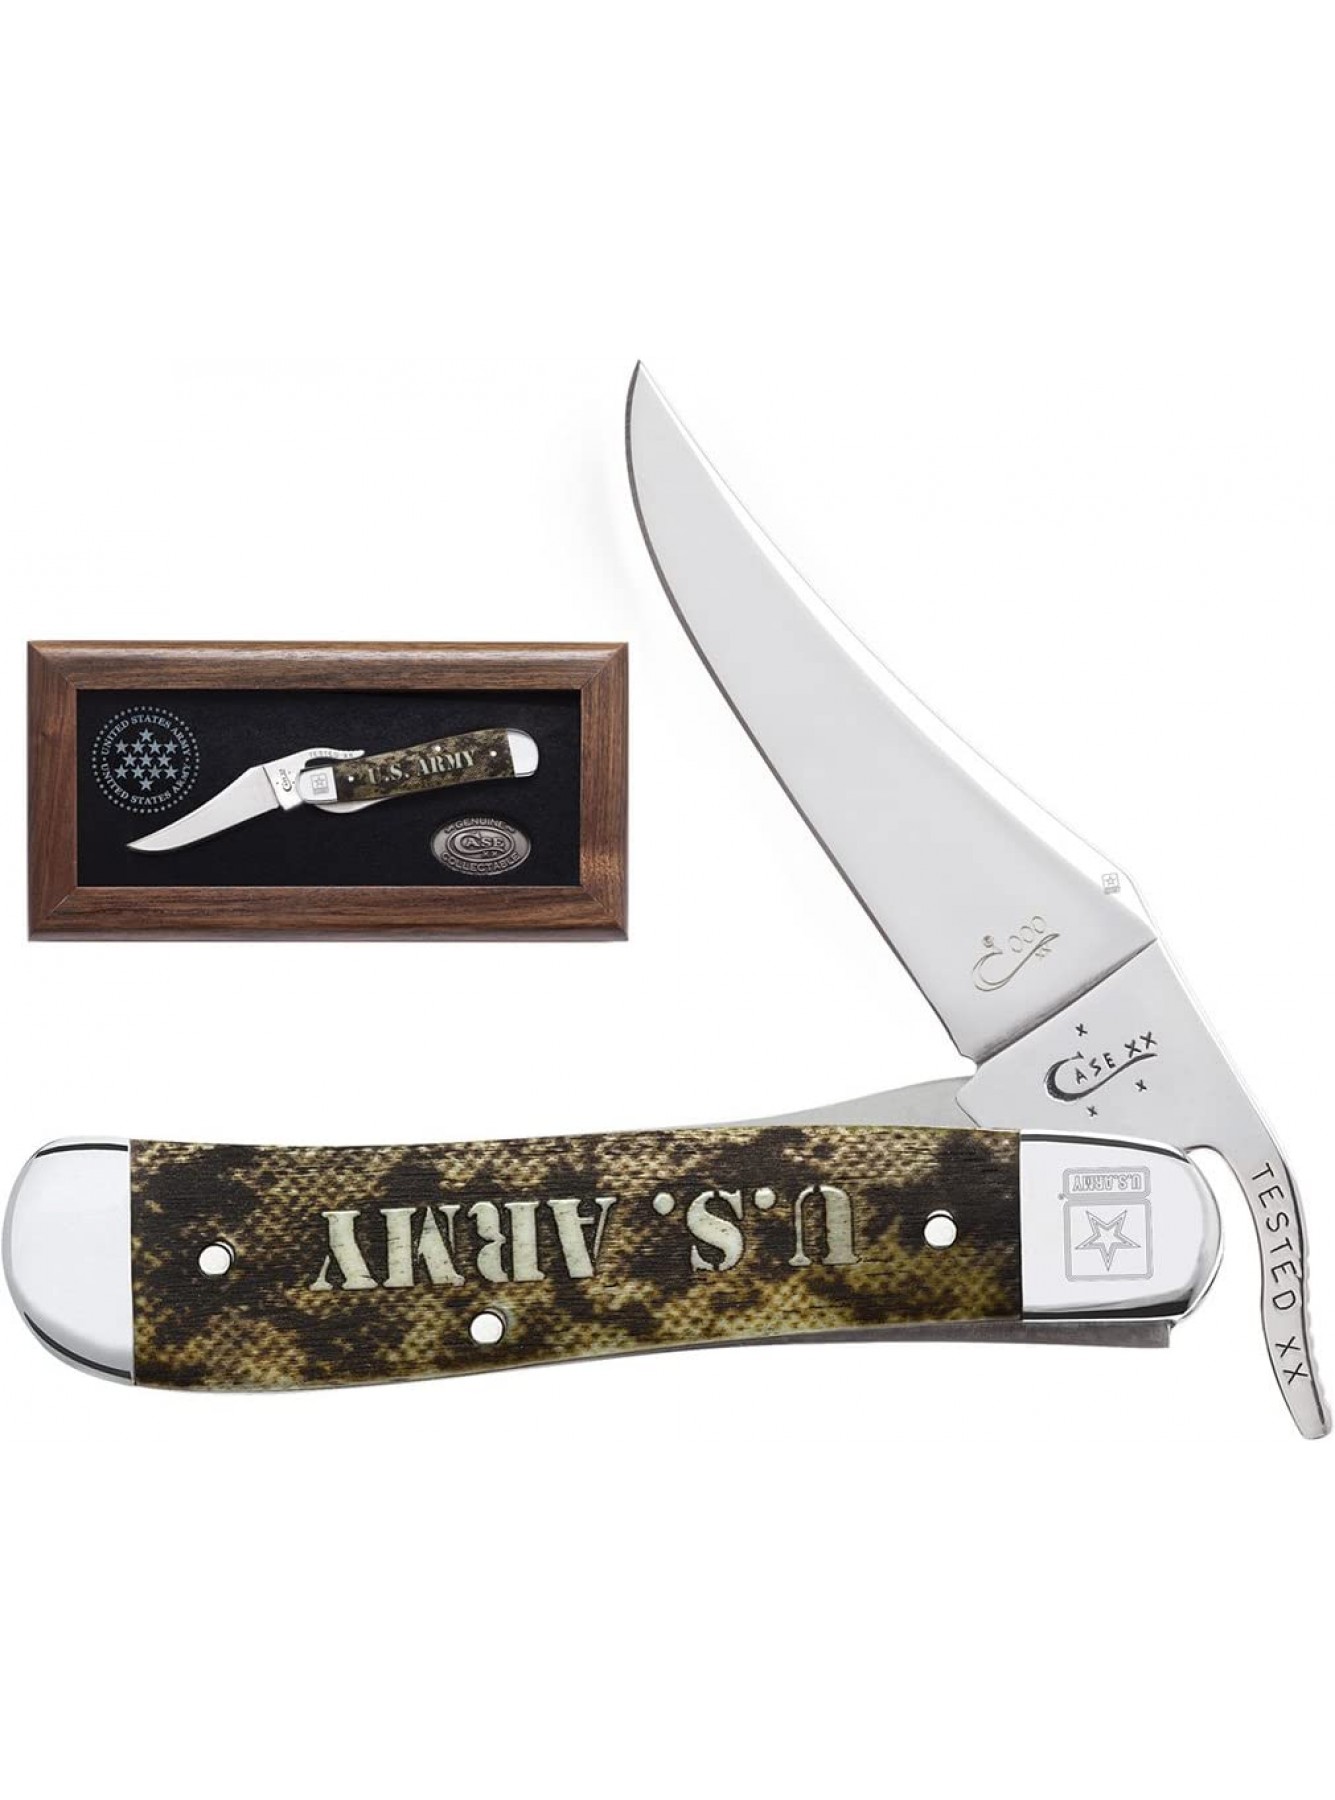 *Case RussLock 15031 U.S. Army Gift Set with Natural Bone Handle in Wooden Box B01MSBCH4H